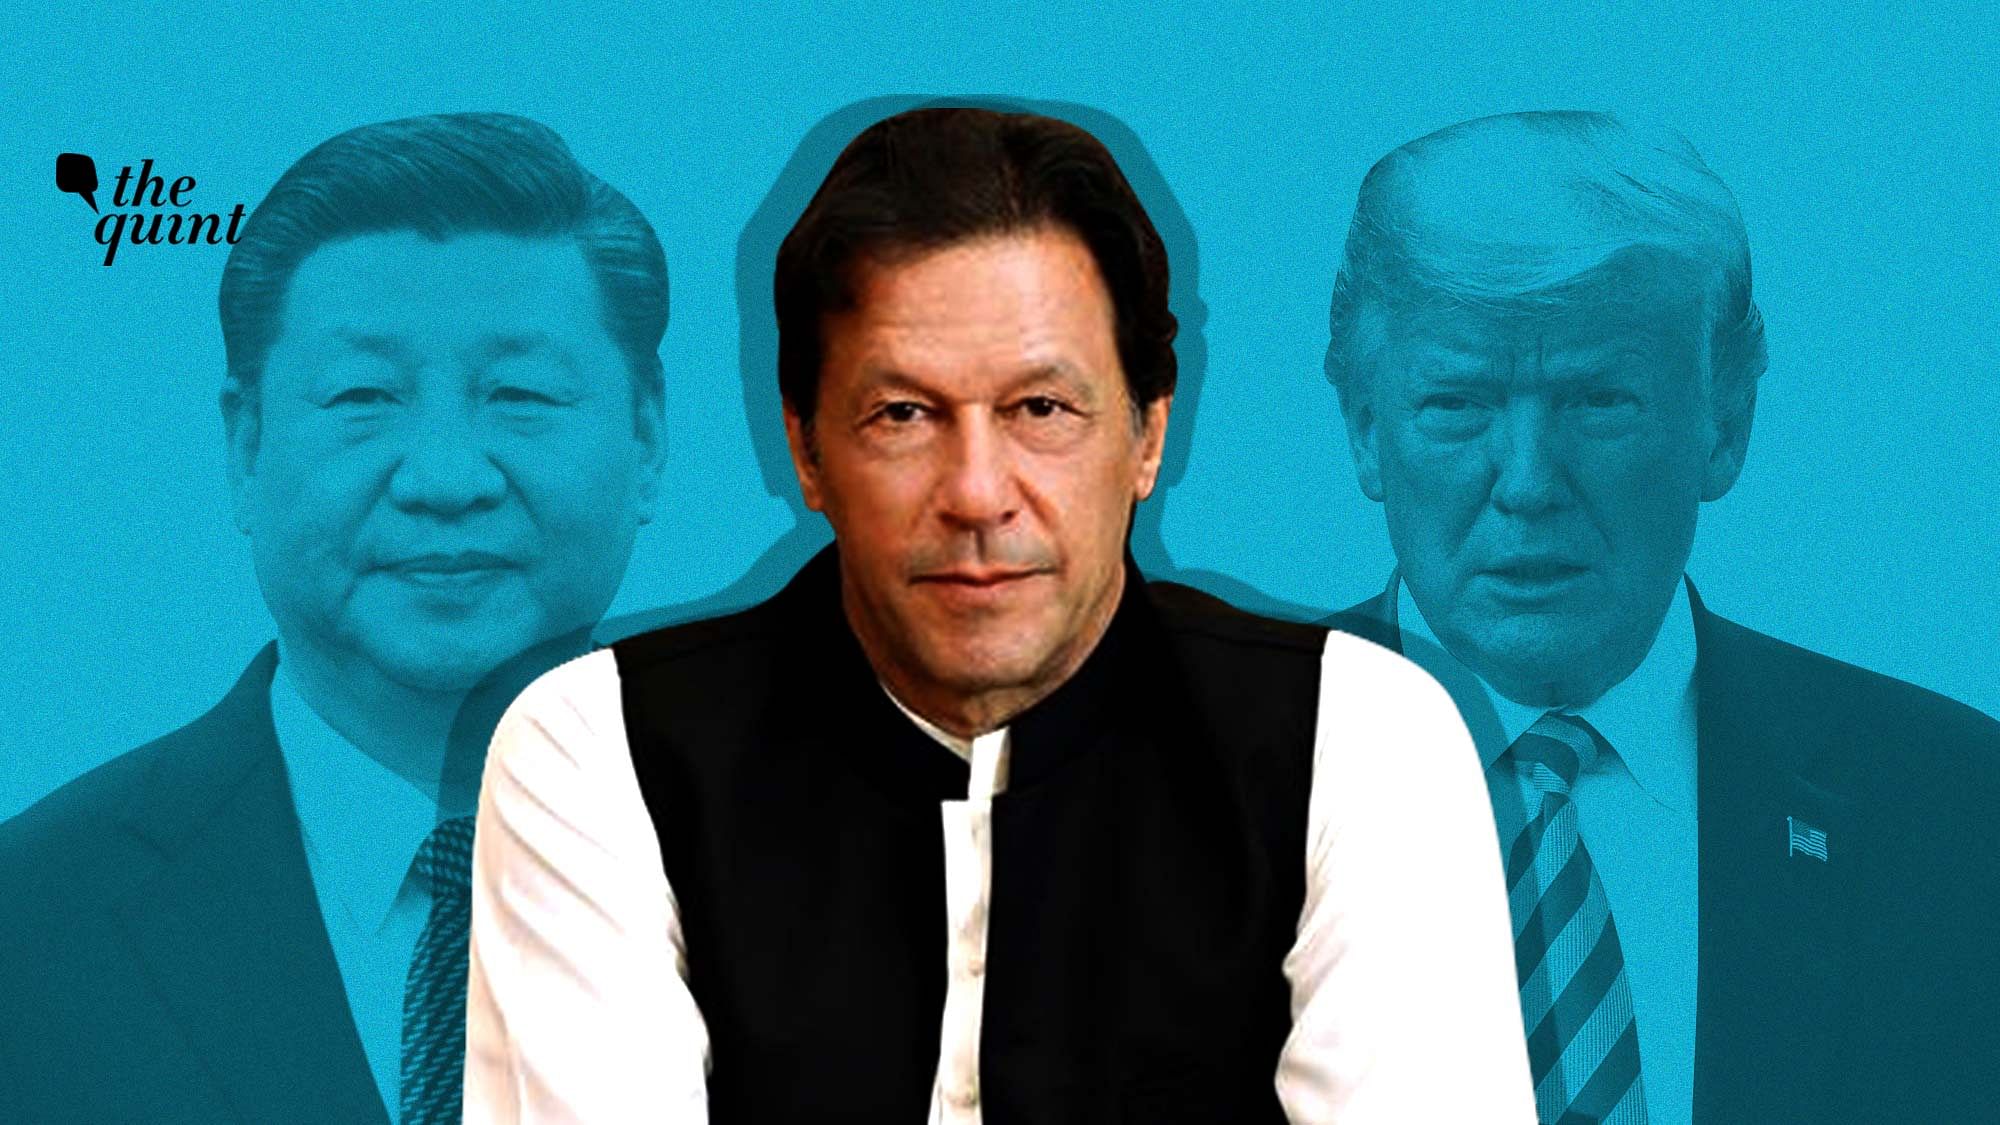 (From Left to Right) Chinese President Xi Jingping, Pakistan Prime Minister Imran Khan and US President Donald Trump.